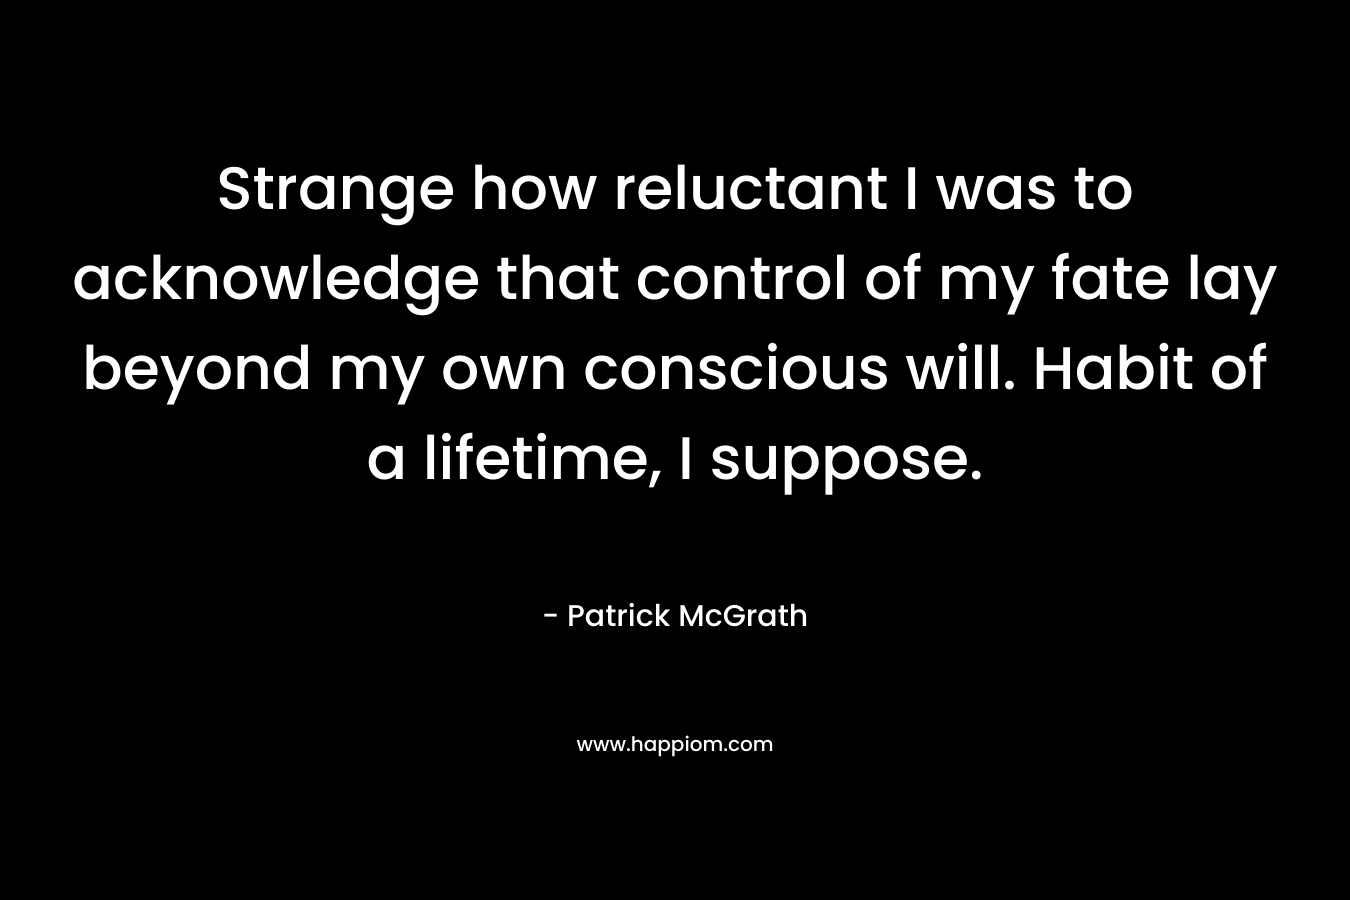 Strange how reluctant I was to acknowledge that control of my fate lay beyond my own conscious will. Habit of a lifetime, I suppose. – Patrick McGrath